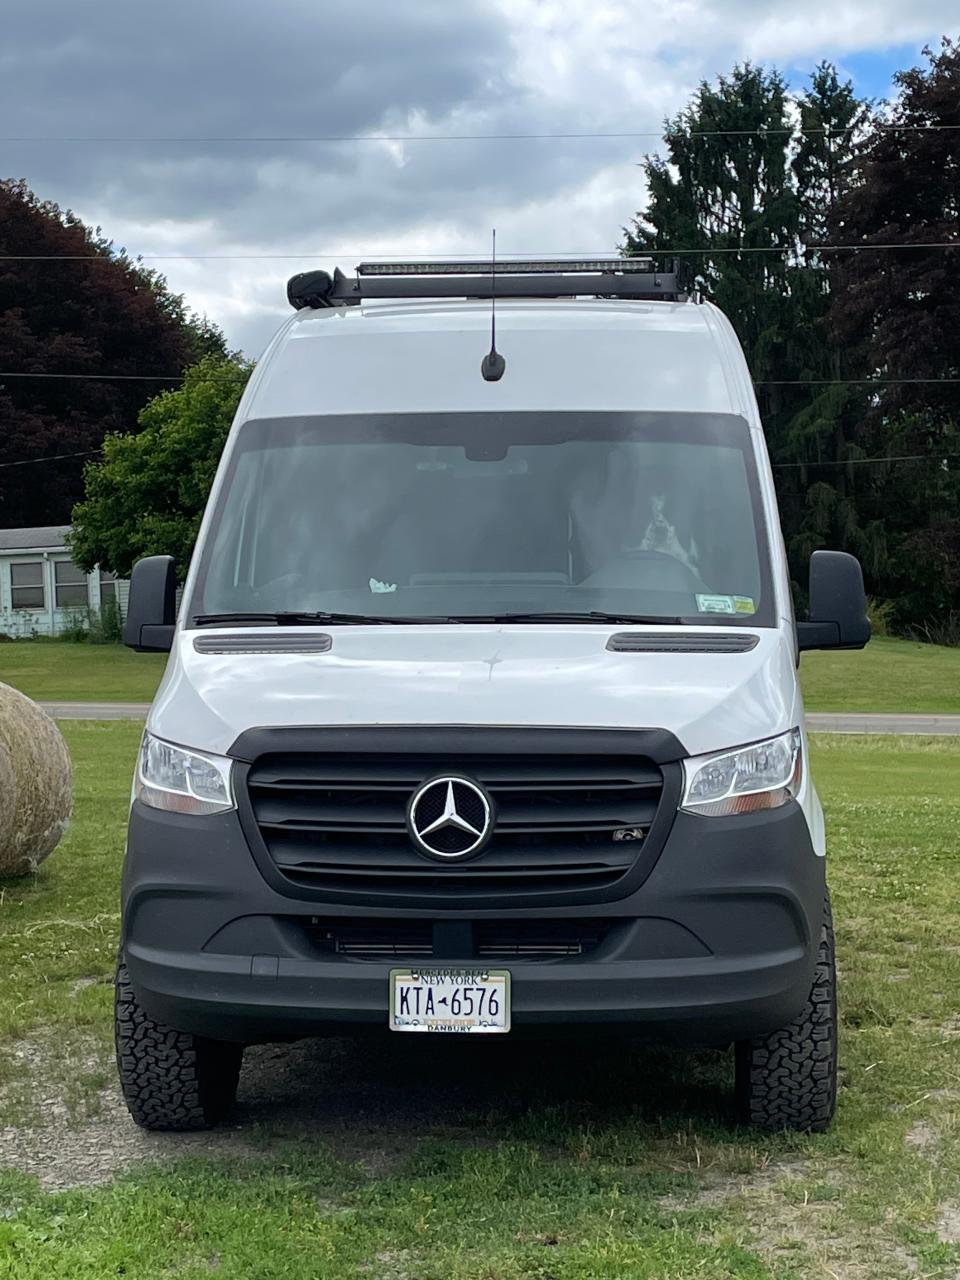 A front view of the Mercedes sprinter van